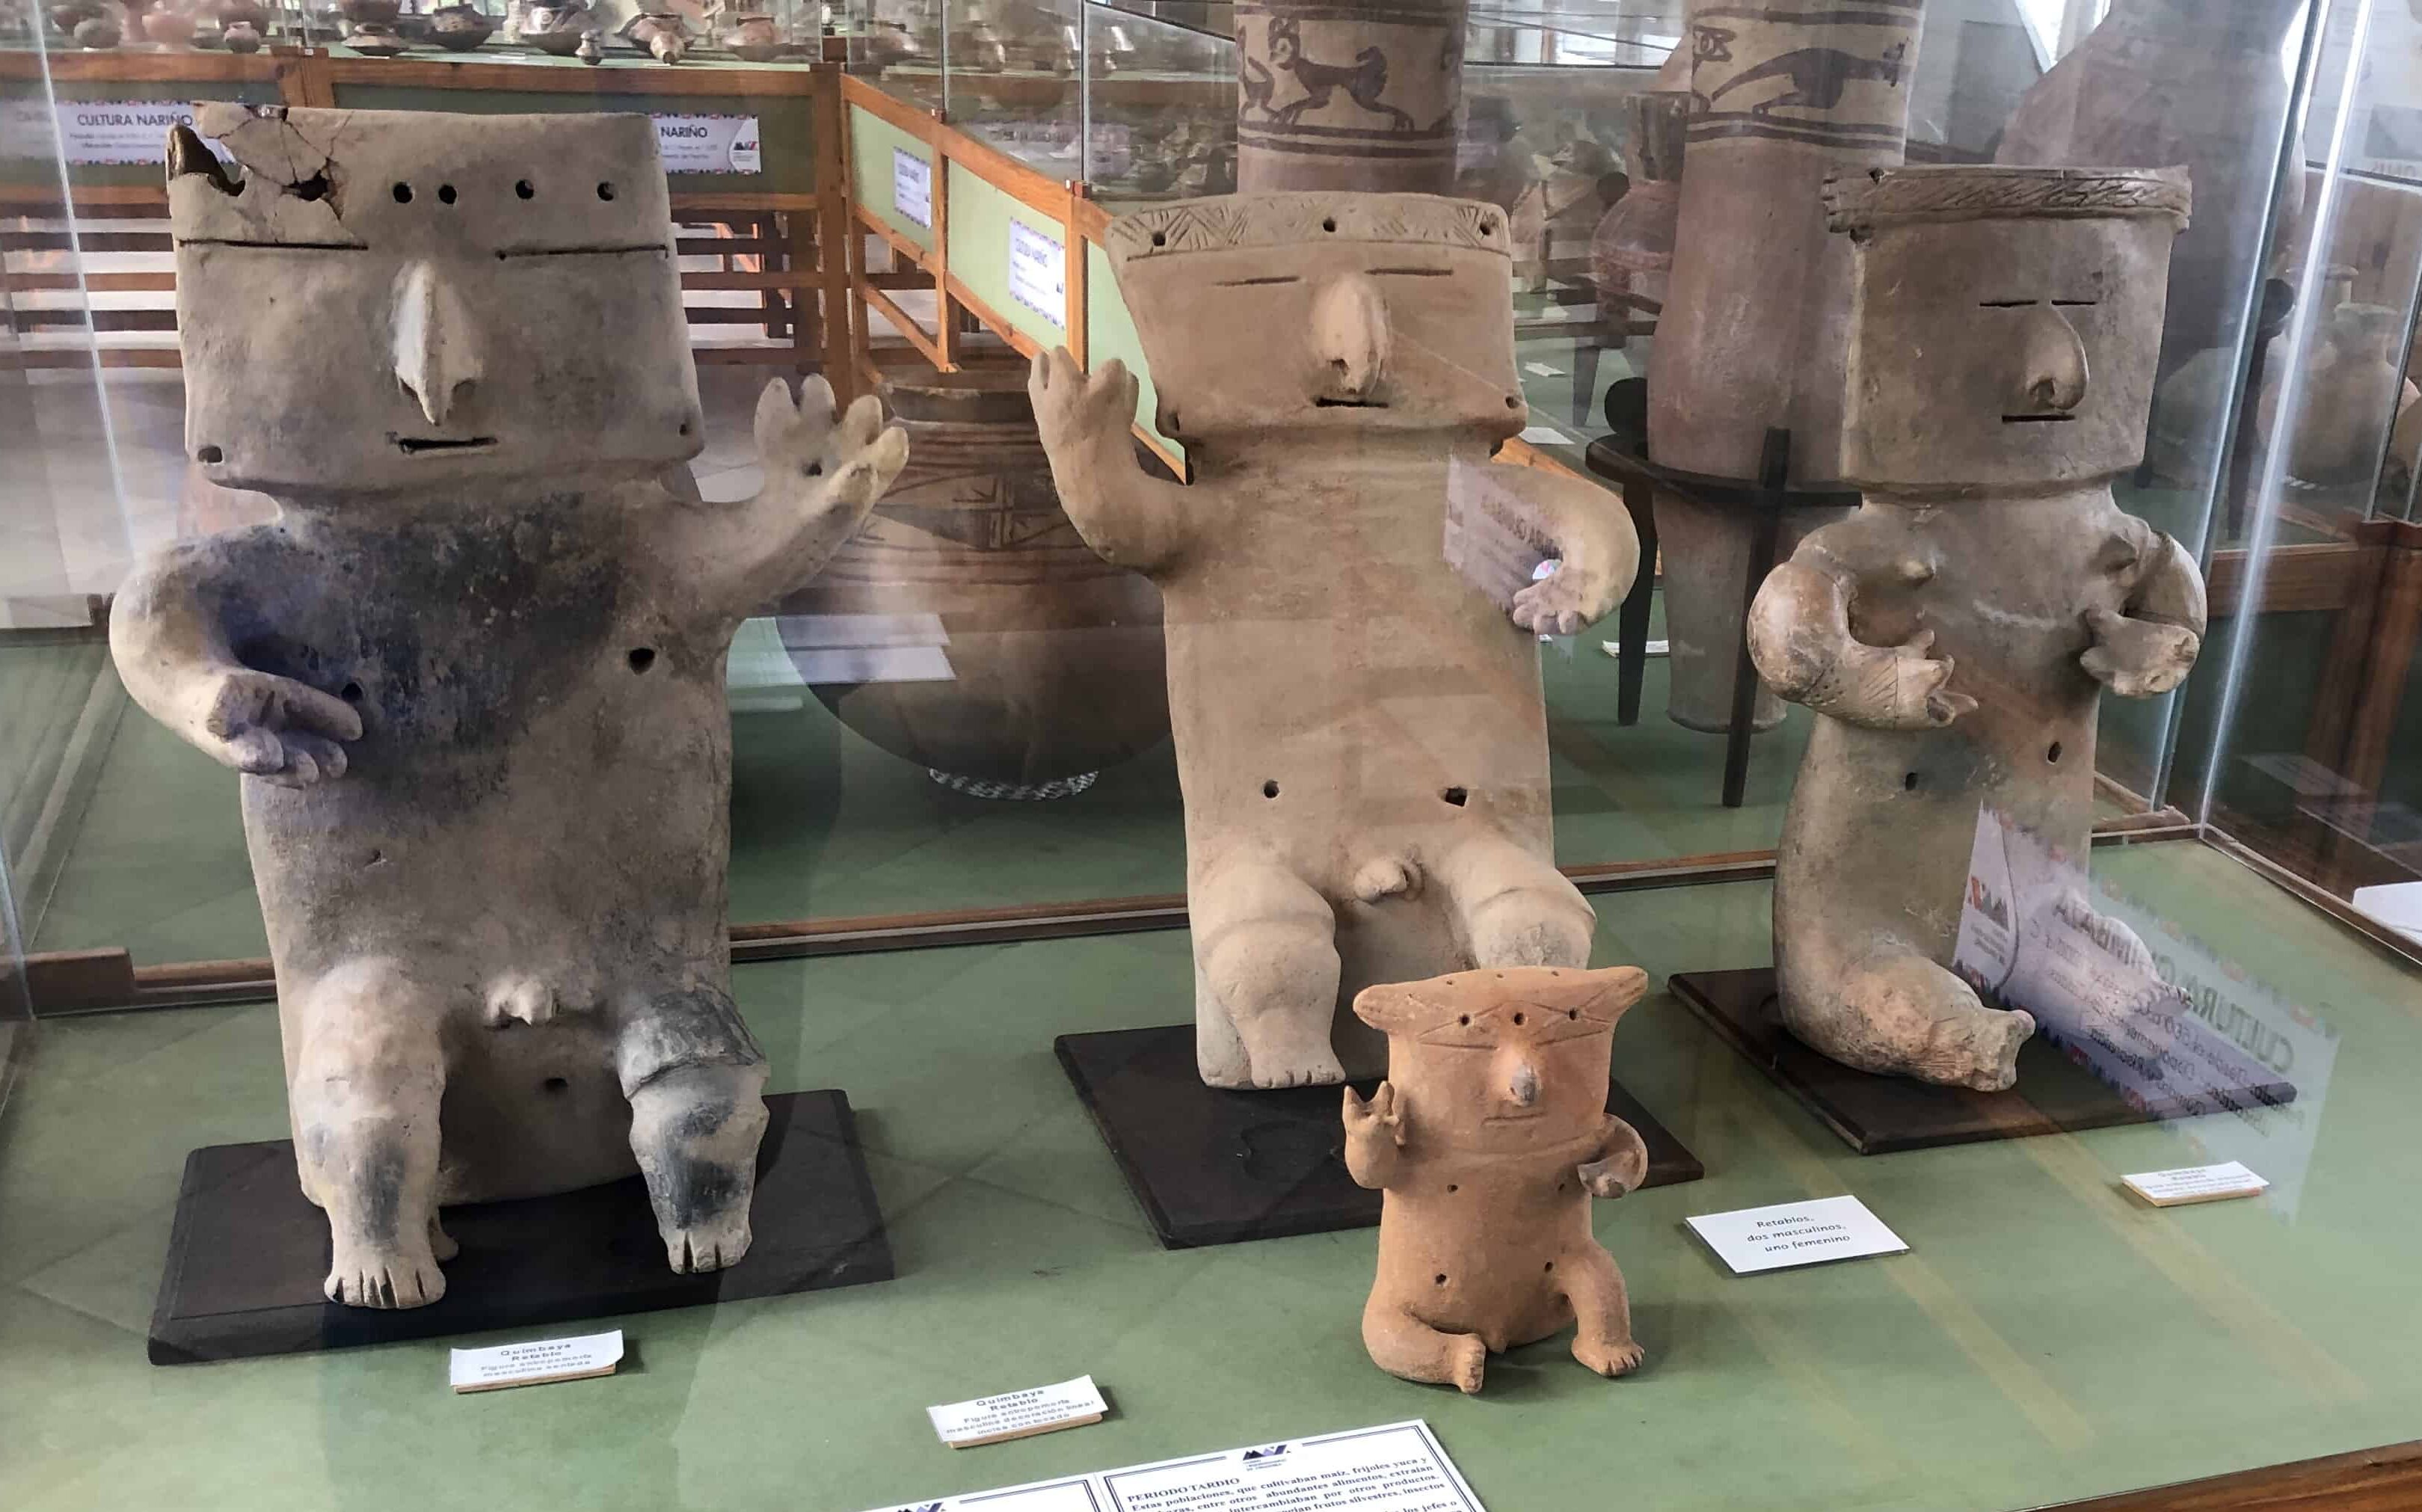 Artifacts from the Quimbaya culture at the Archaeological Museum